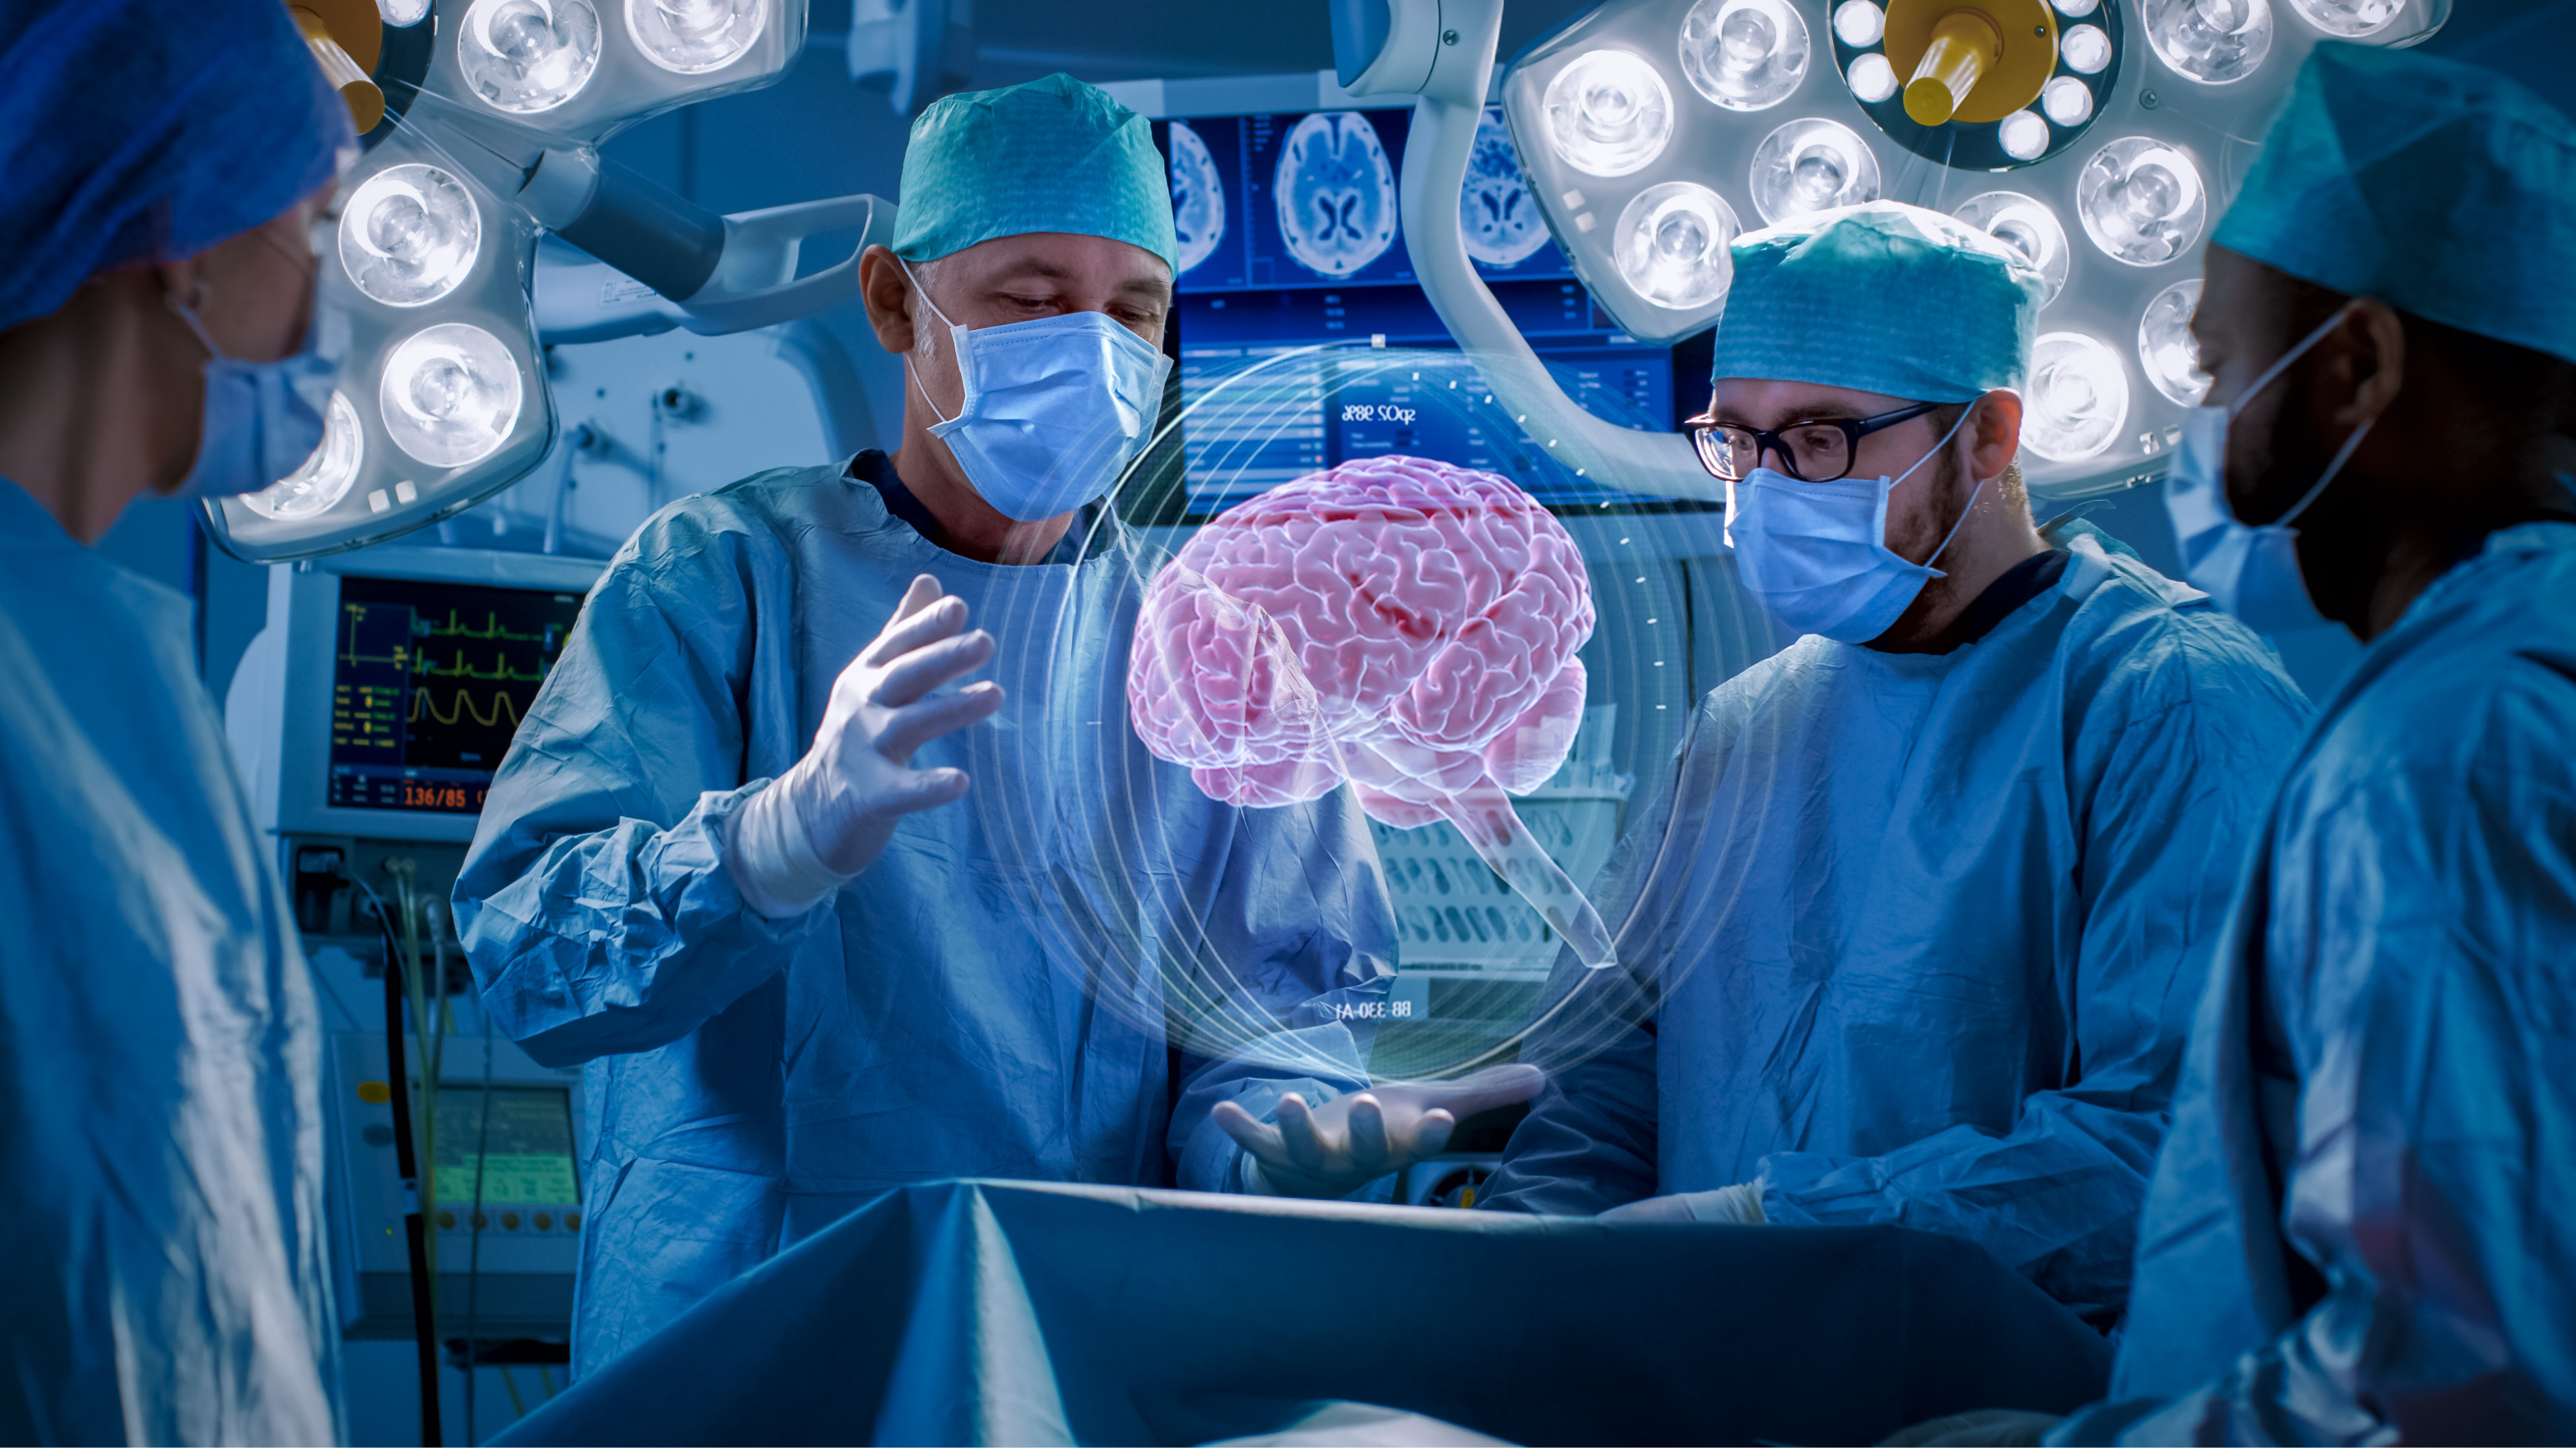 EON REALITY INTRODUCES GROUNDBREAKING SPATIAL AI FOR REVOLUTIONARY MEDICAL APPLICATIONS